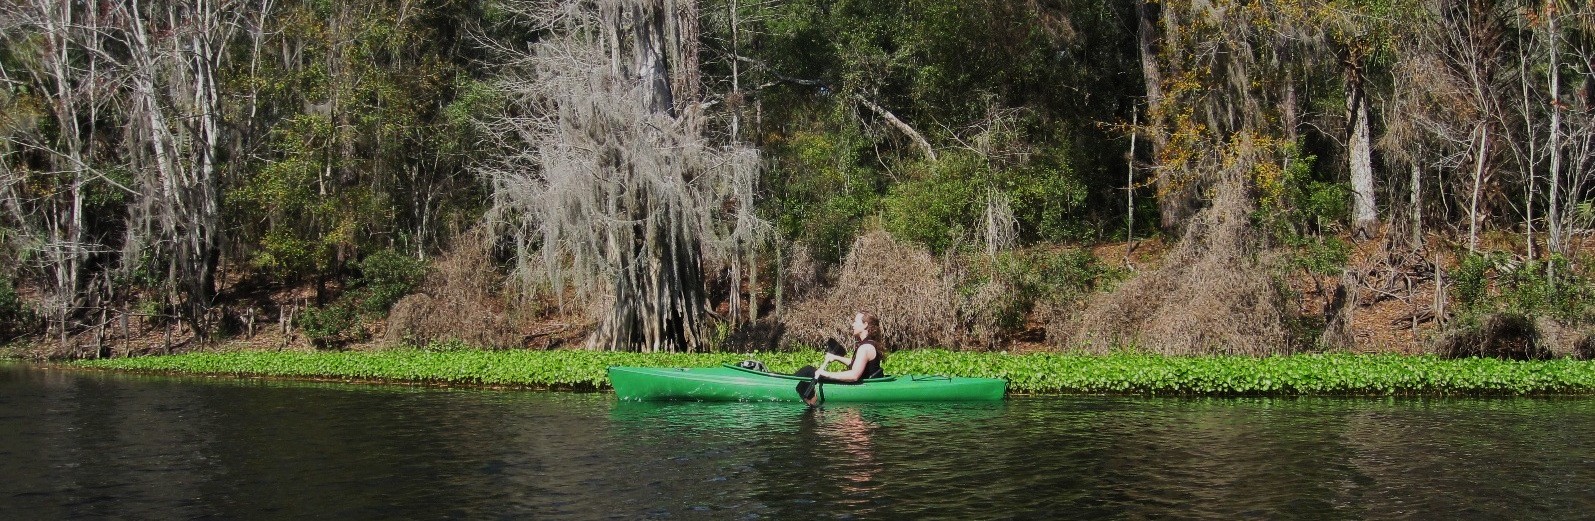 kayaking the Withlacoochee River